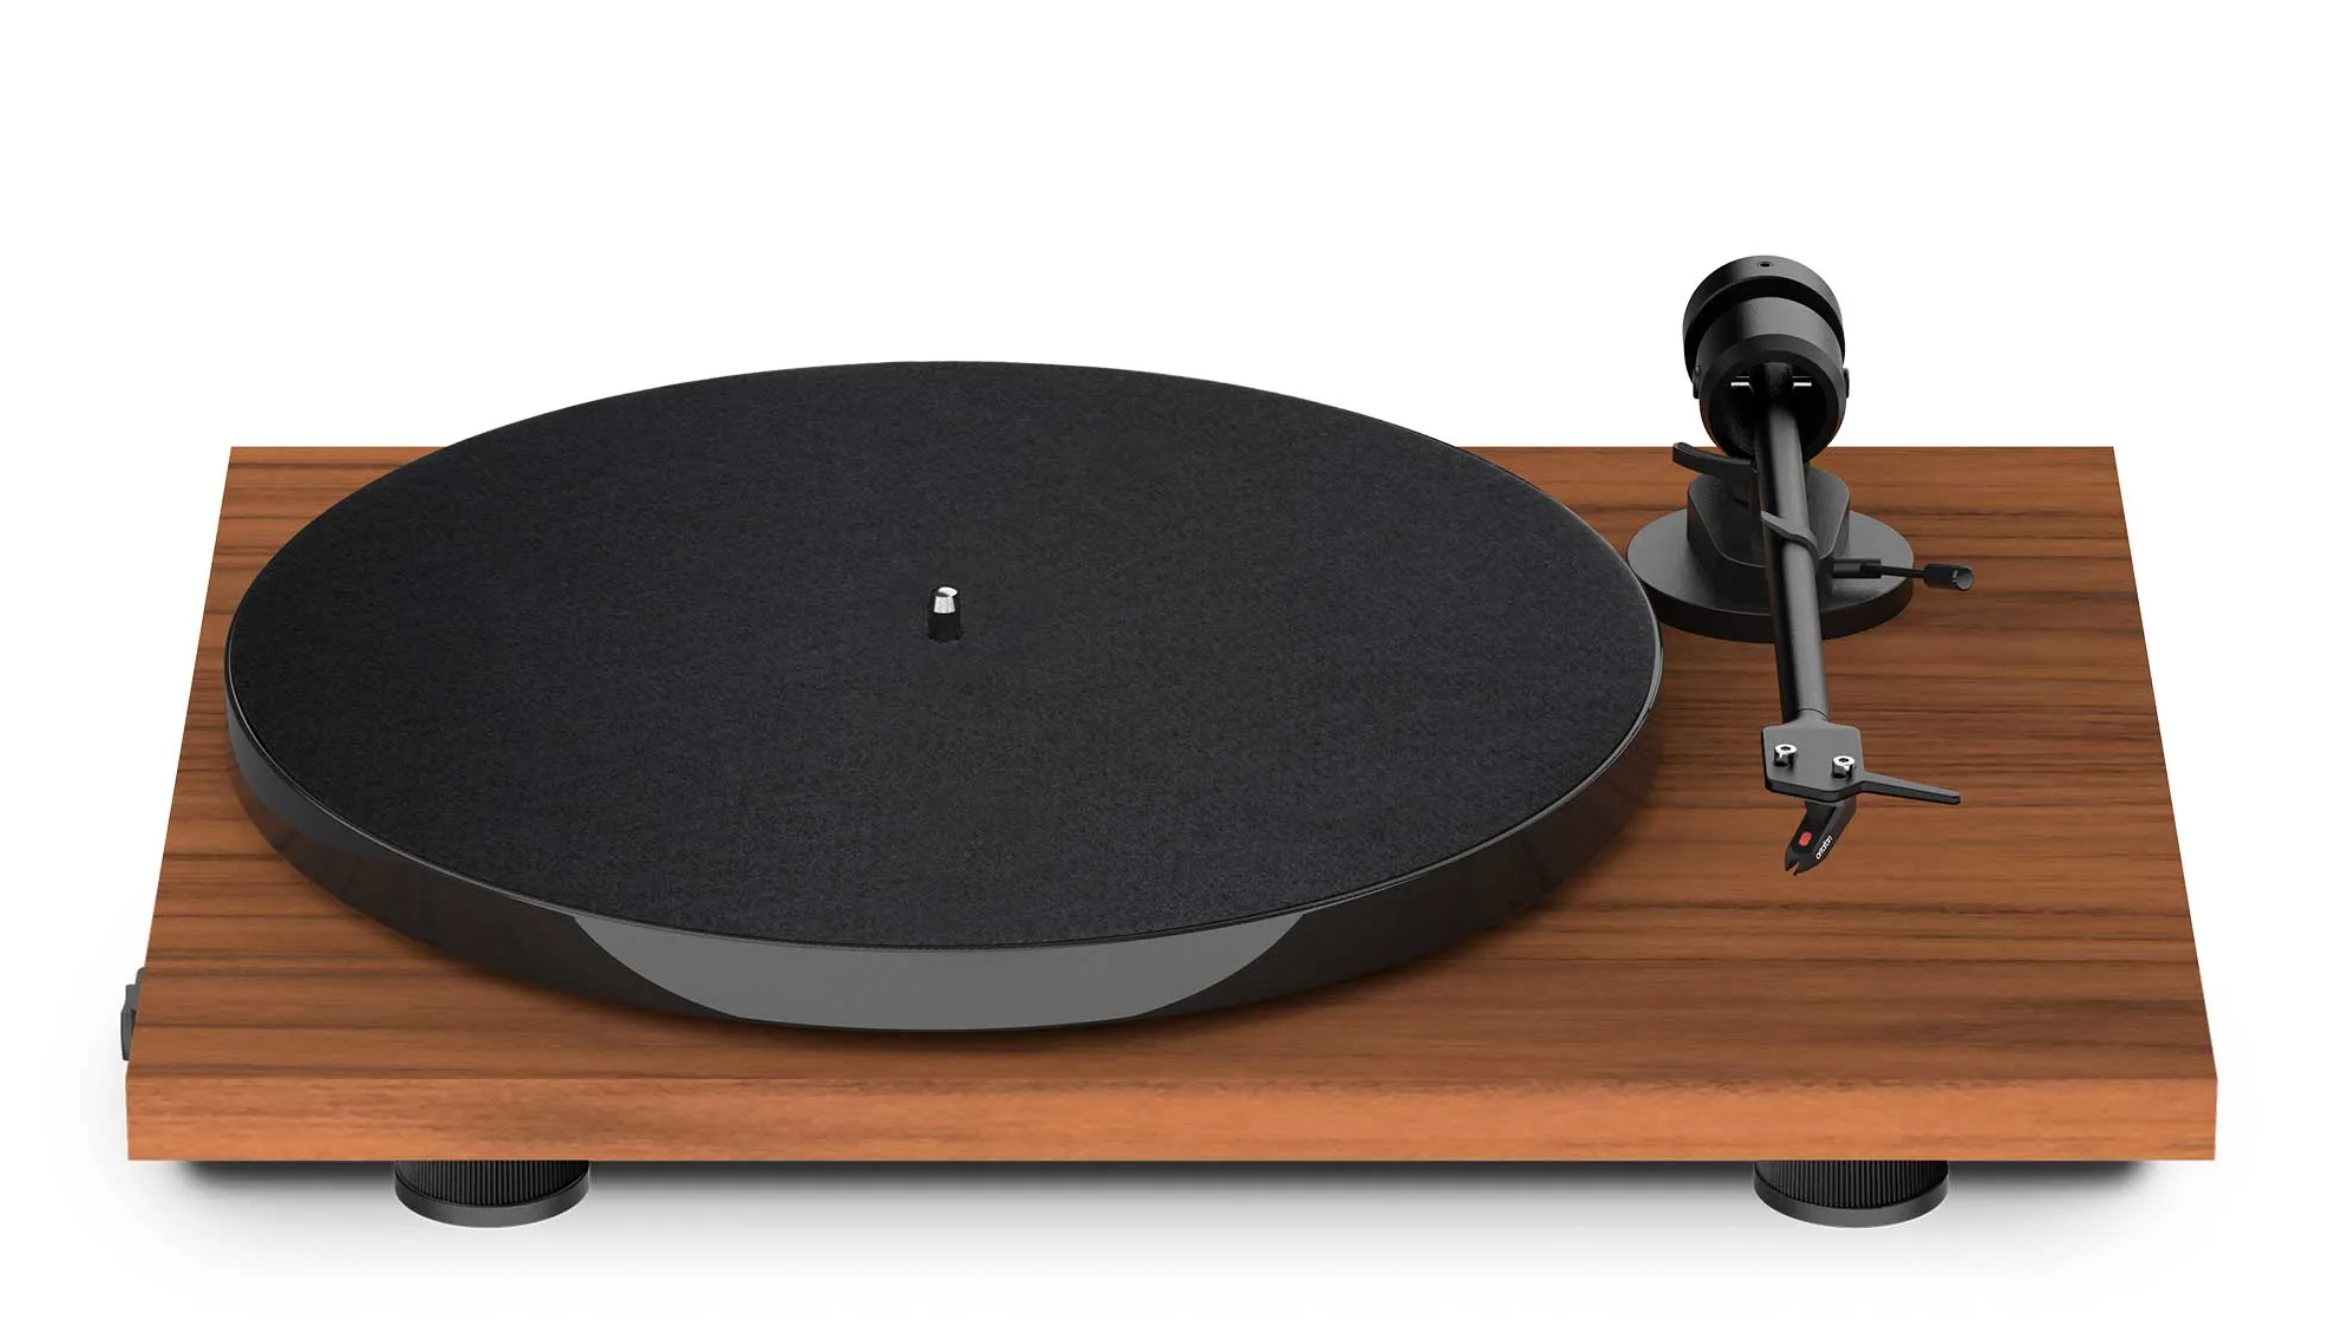 Pro-Ject unveils a new E1 range of budget turntables